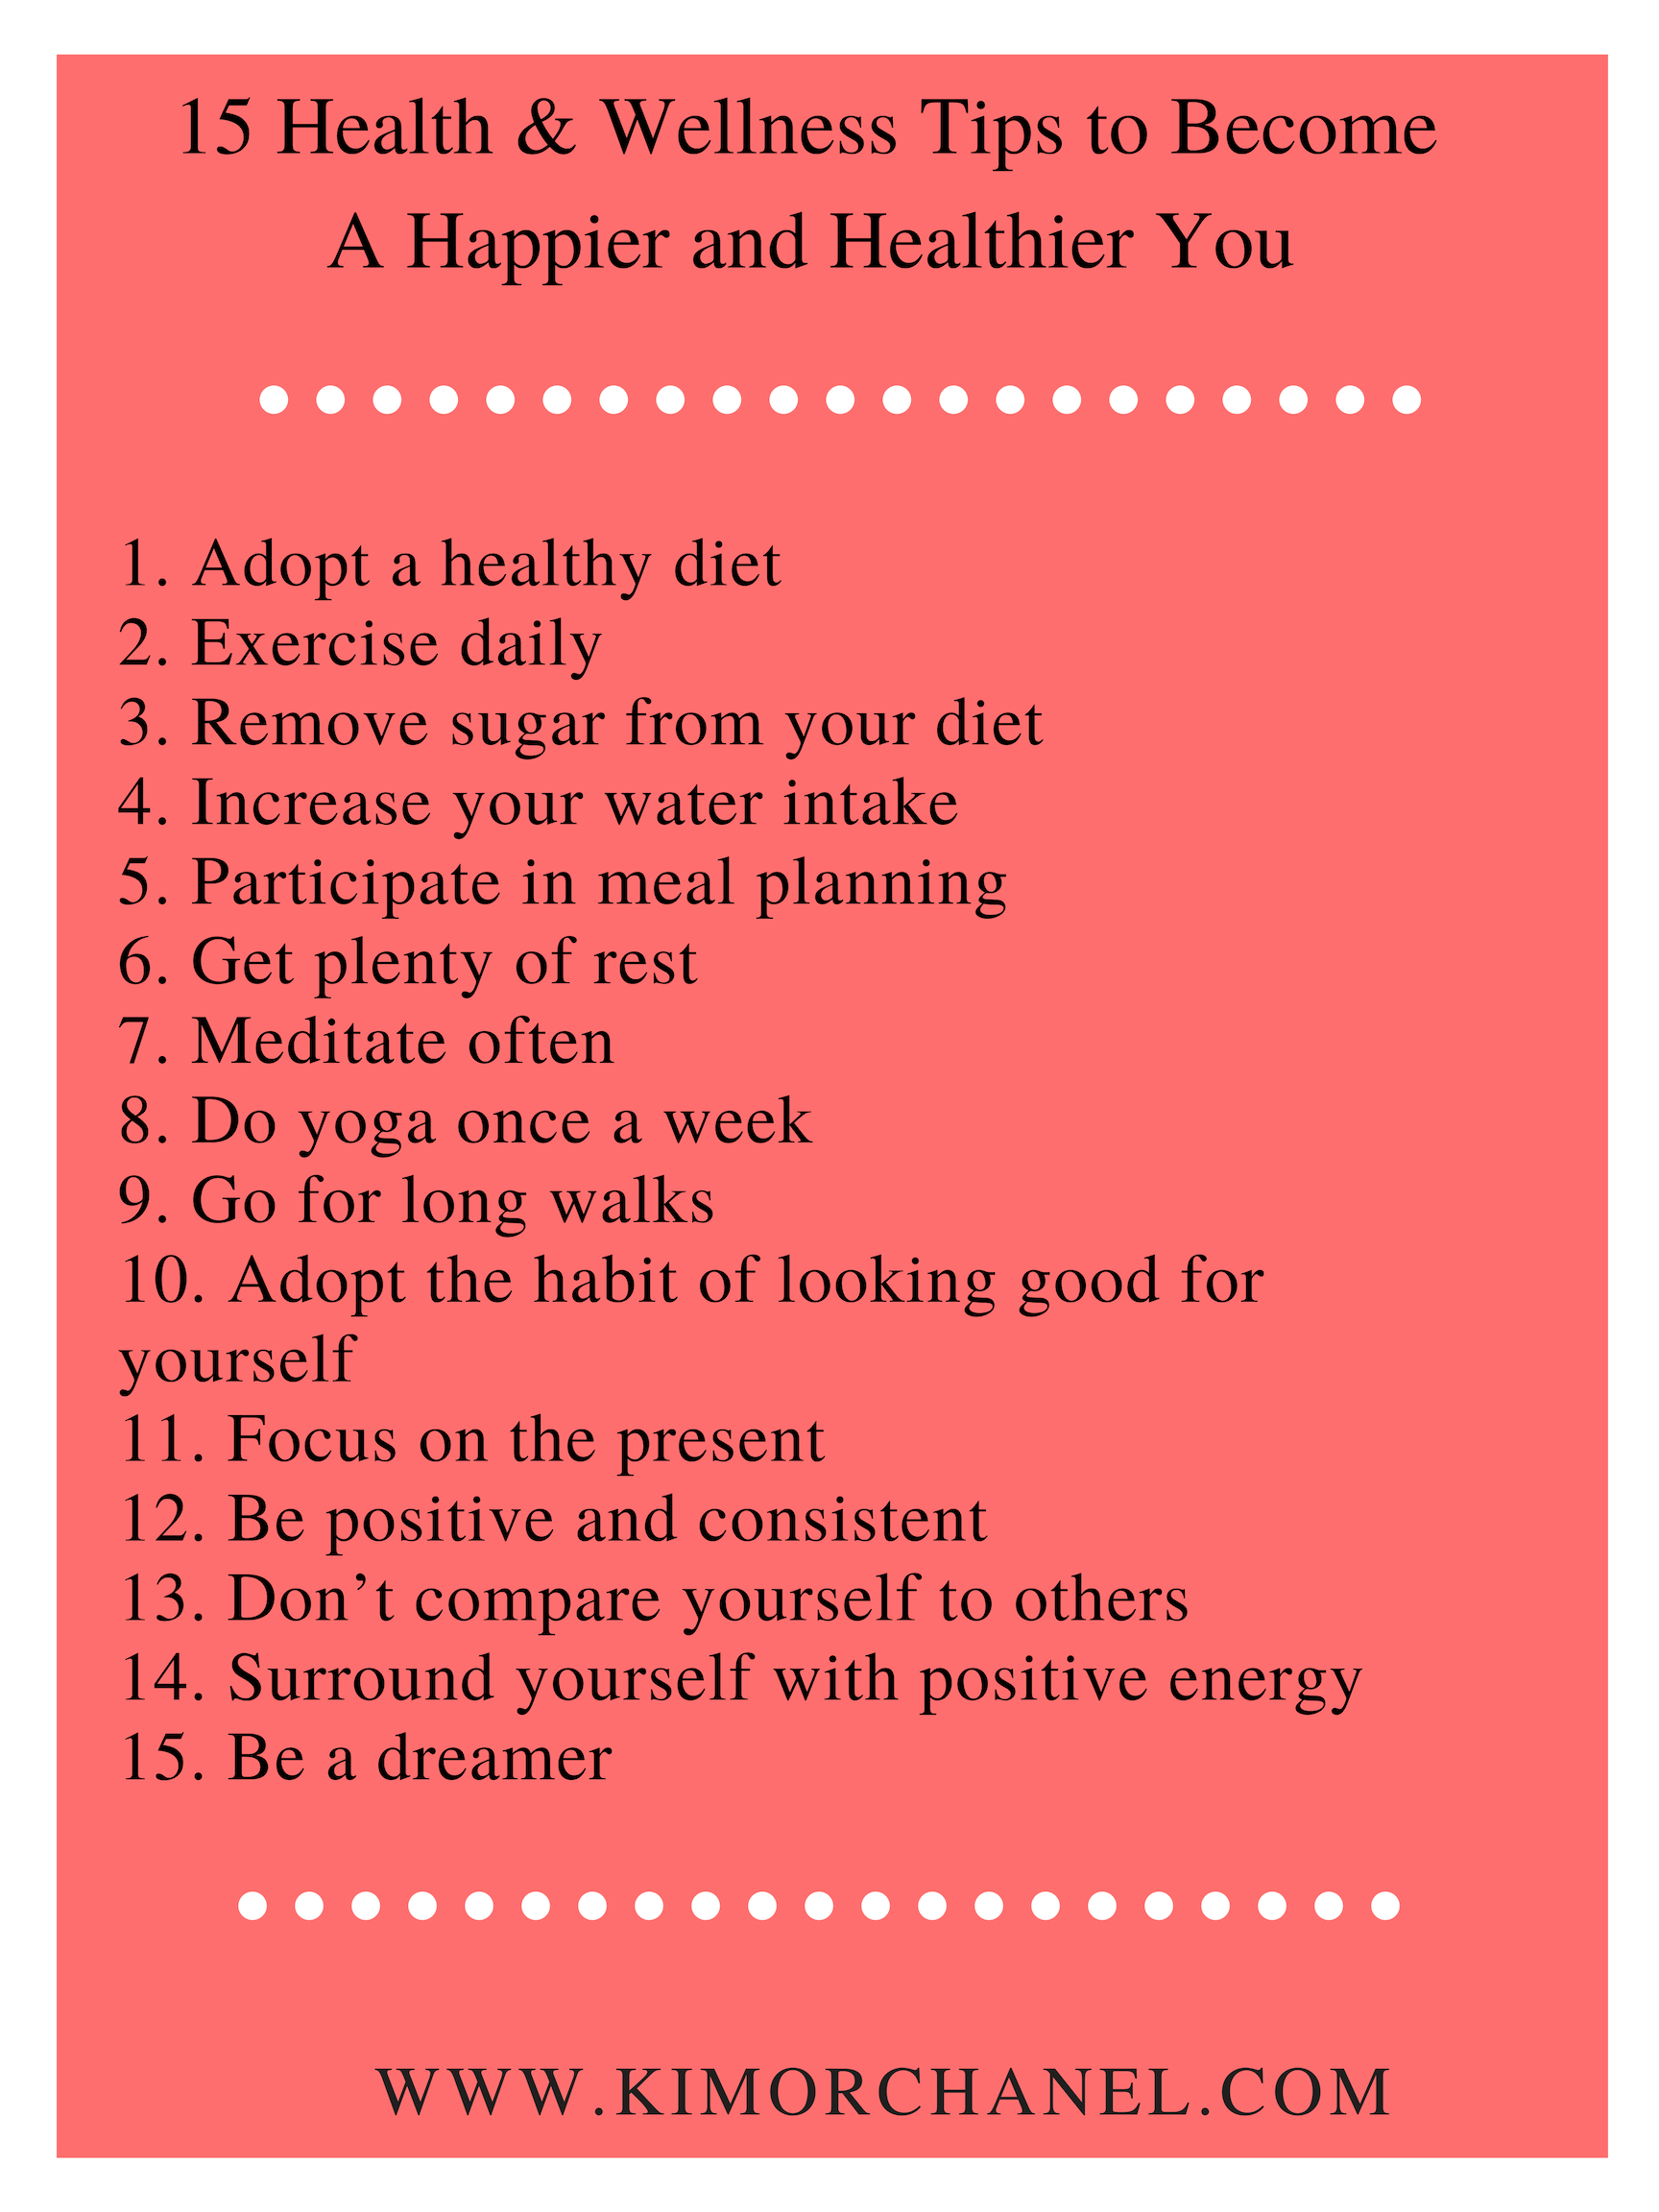 15 Tips to Stay Healthy and Strong